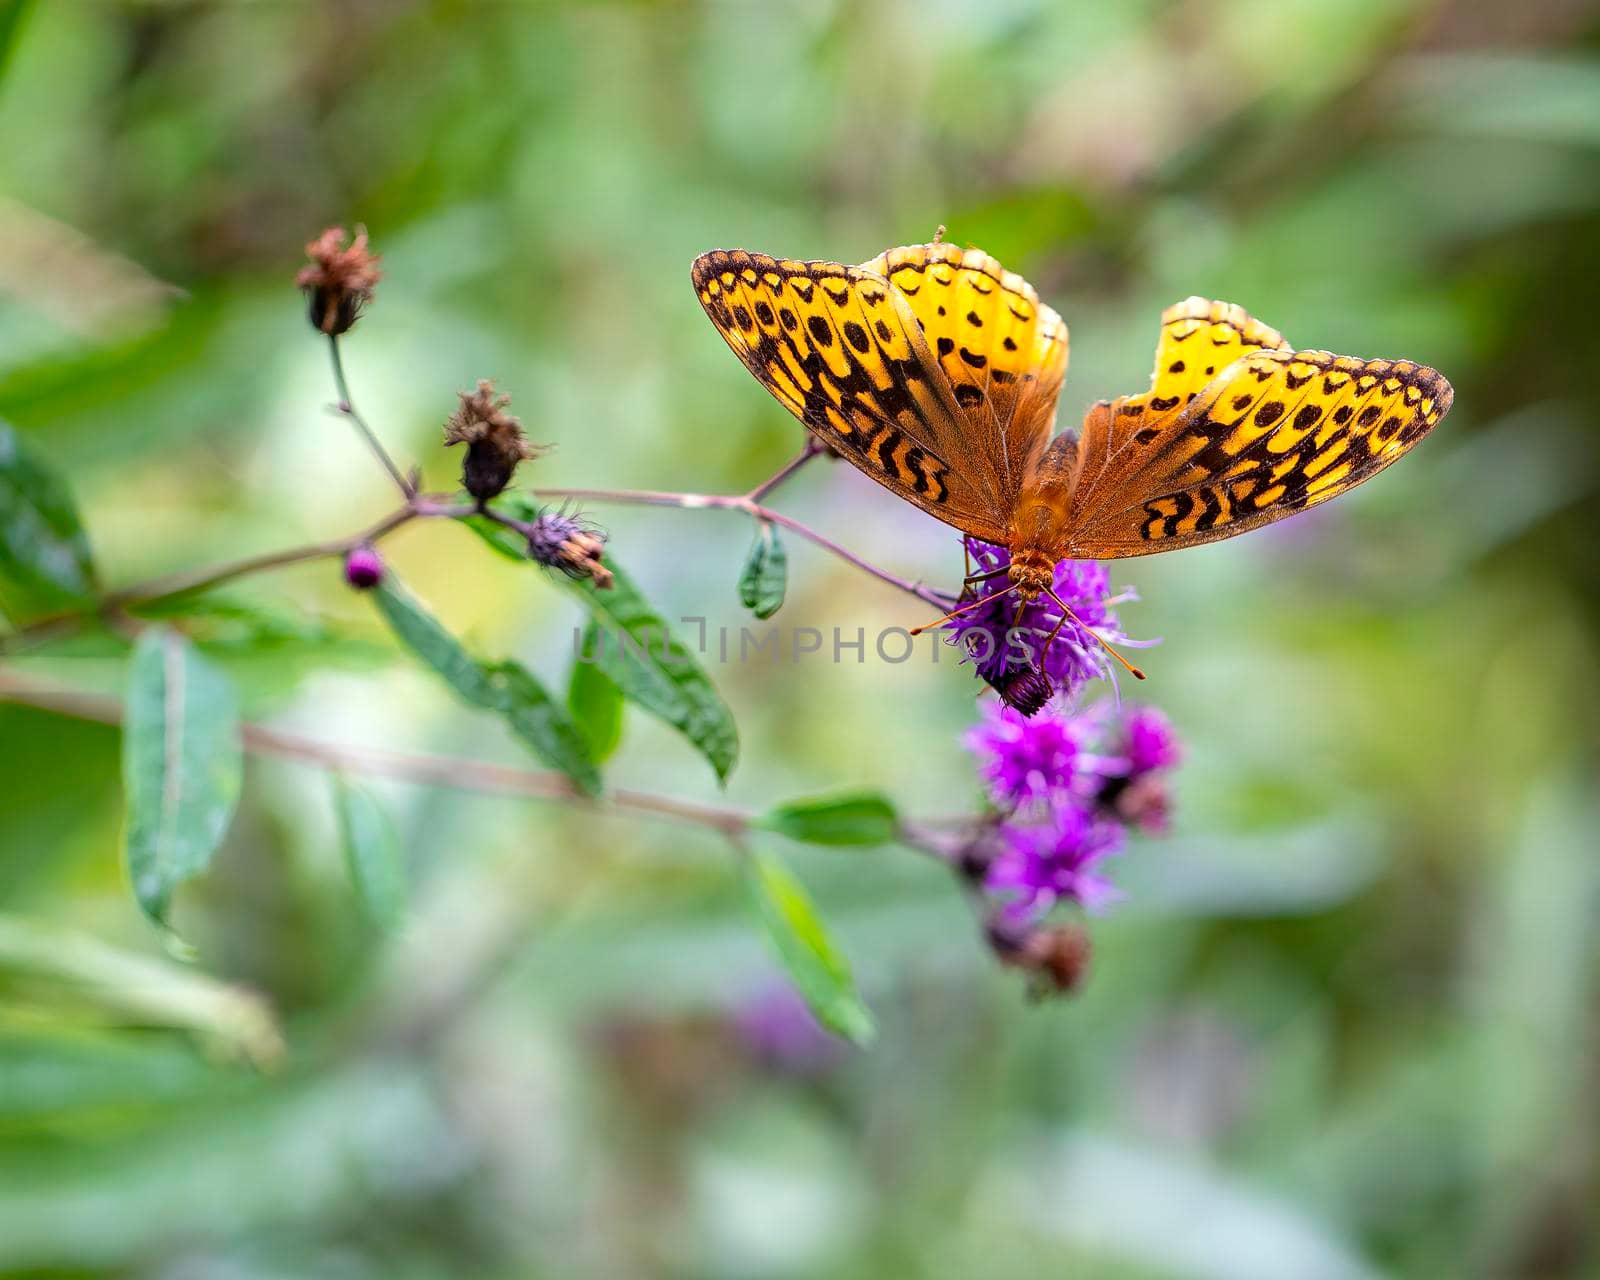 Great Spangled Fritillary butterfly foraging for nectar.